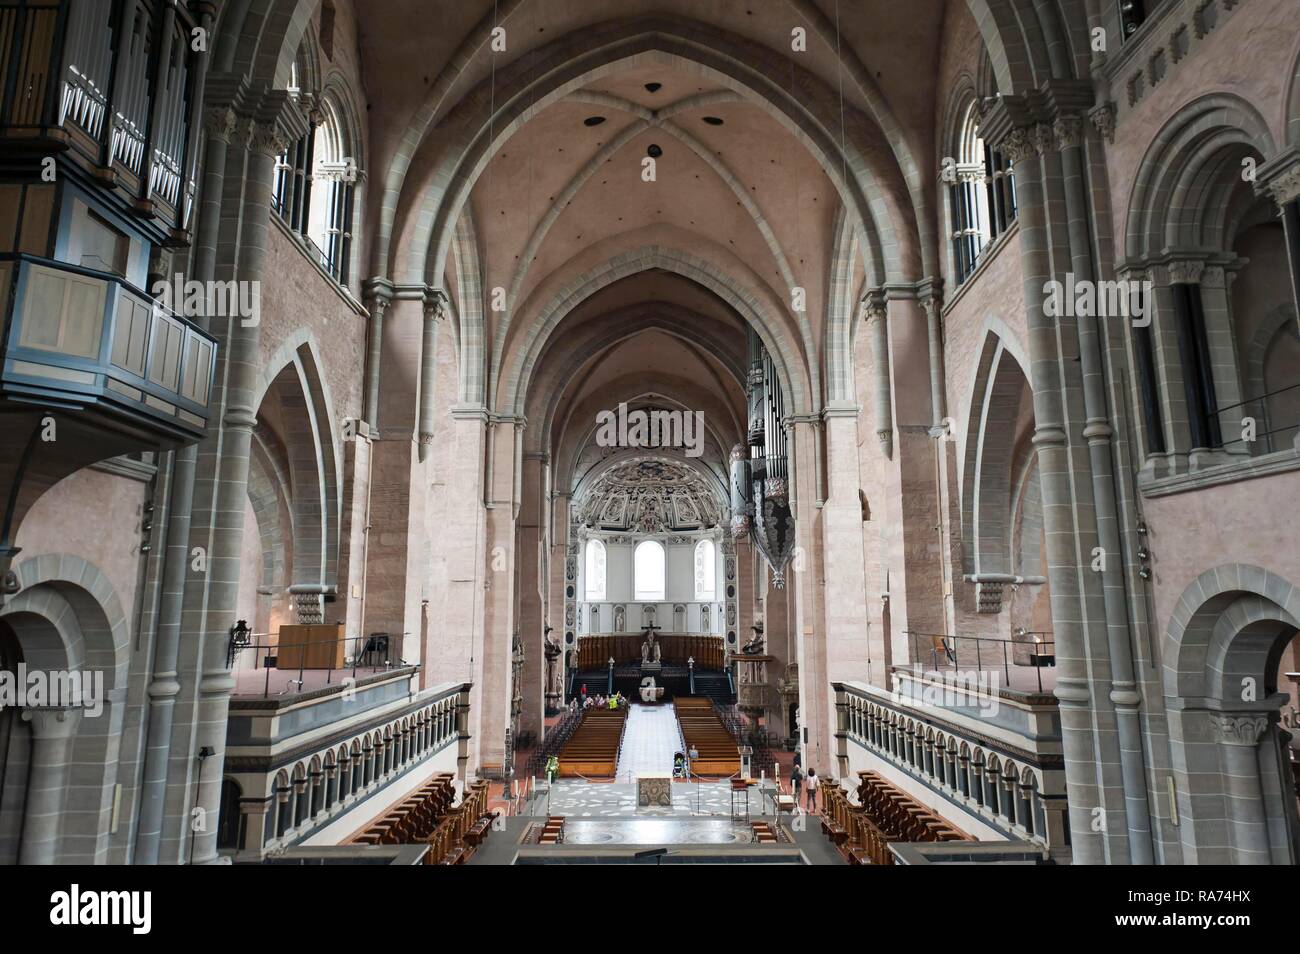 Interior, Trier Cathedral, Hohe Domkirche St. Peter zu Trier, Rhineland-Palatinate, Germany Stock Photo